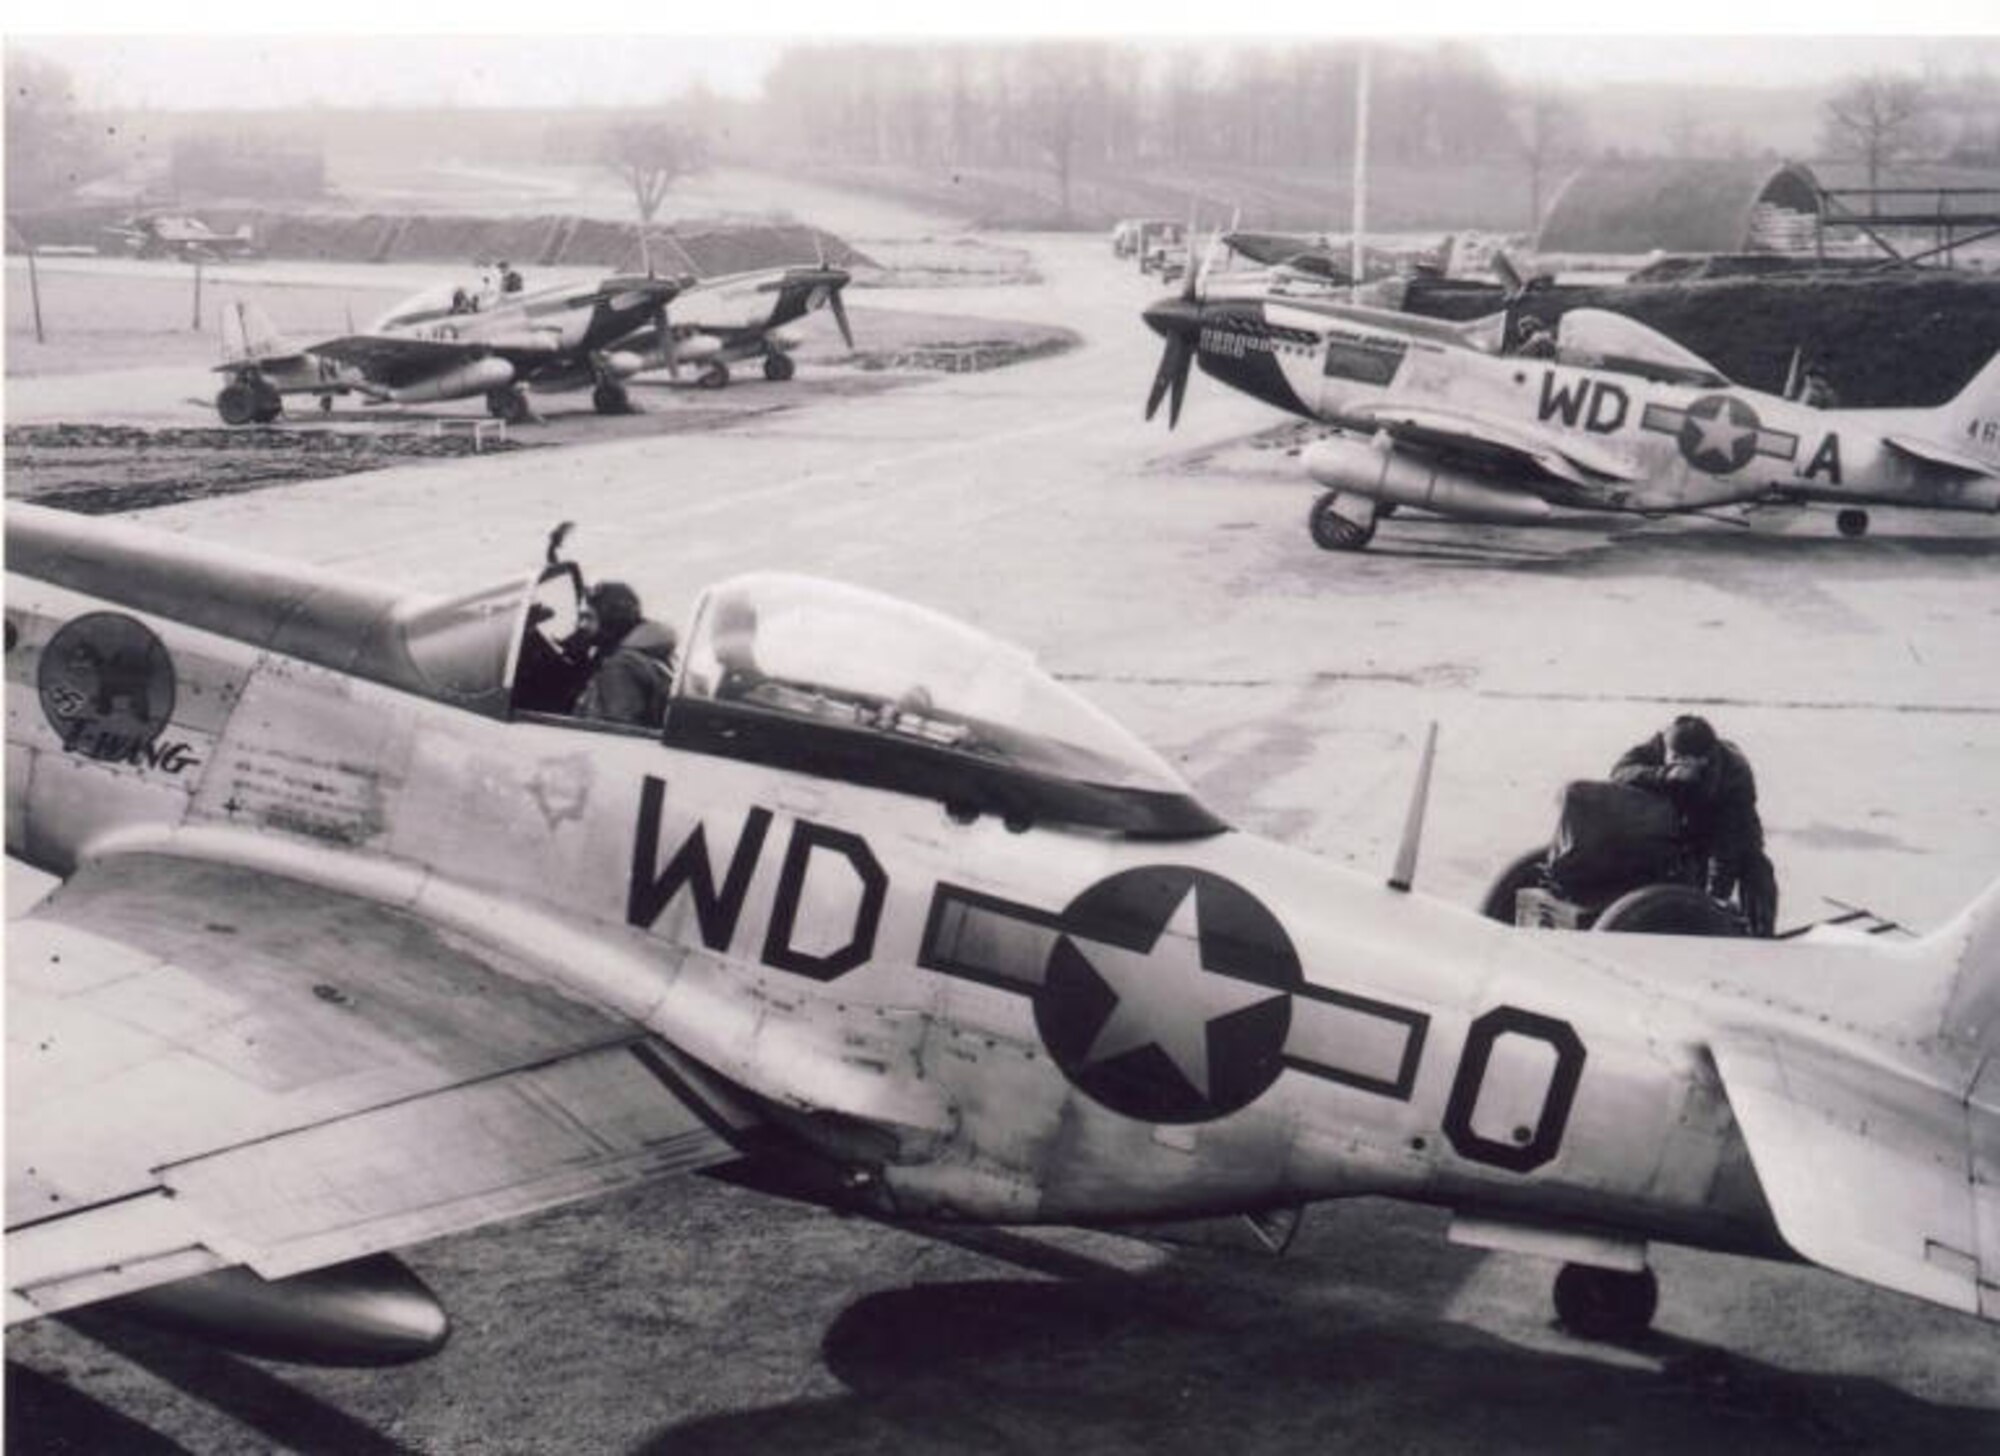 A photograph of a P-51 Mustang of the 335th Fighter Squadron parked in a revetment at Debden Air Base in England. (Courtesy Photo)